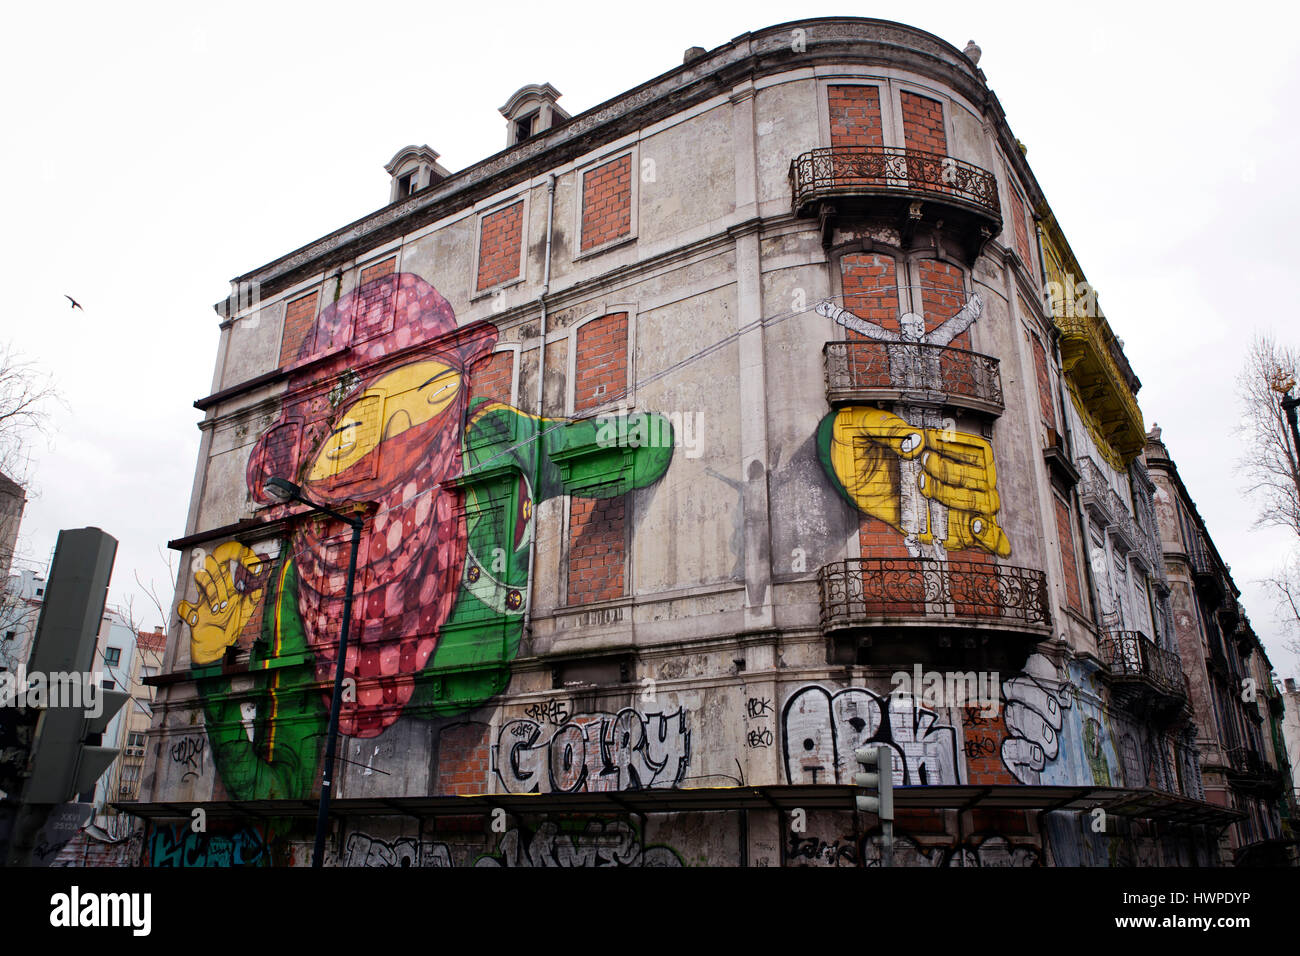 This collaborative piece by the two Urban Street Artists Blu and Os Gémeos in Lisbon, Portugal. Stock Photo